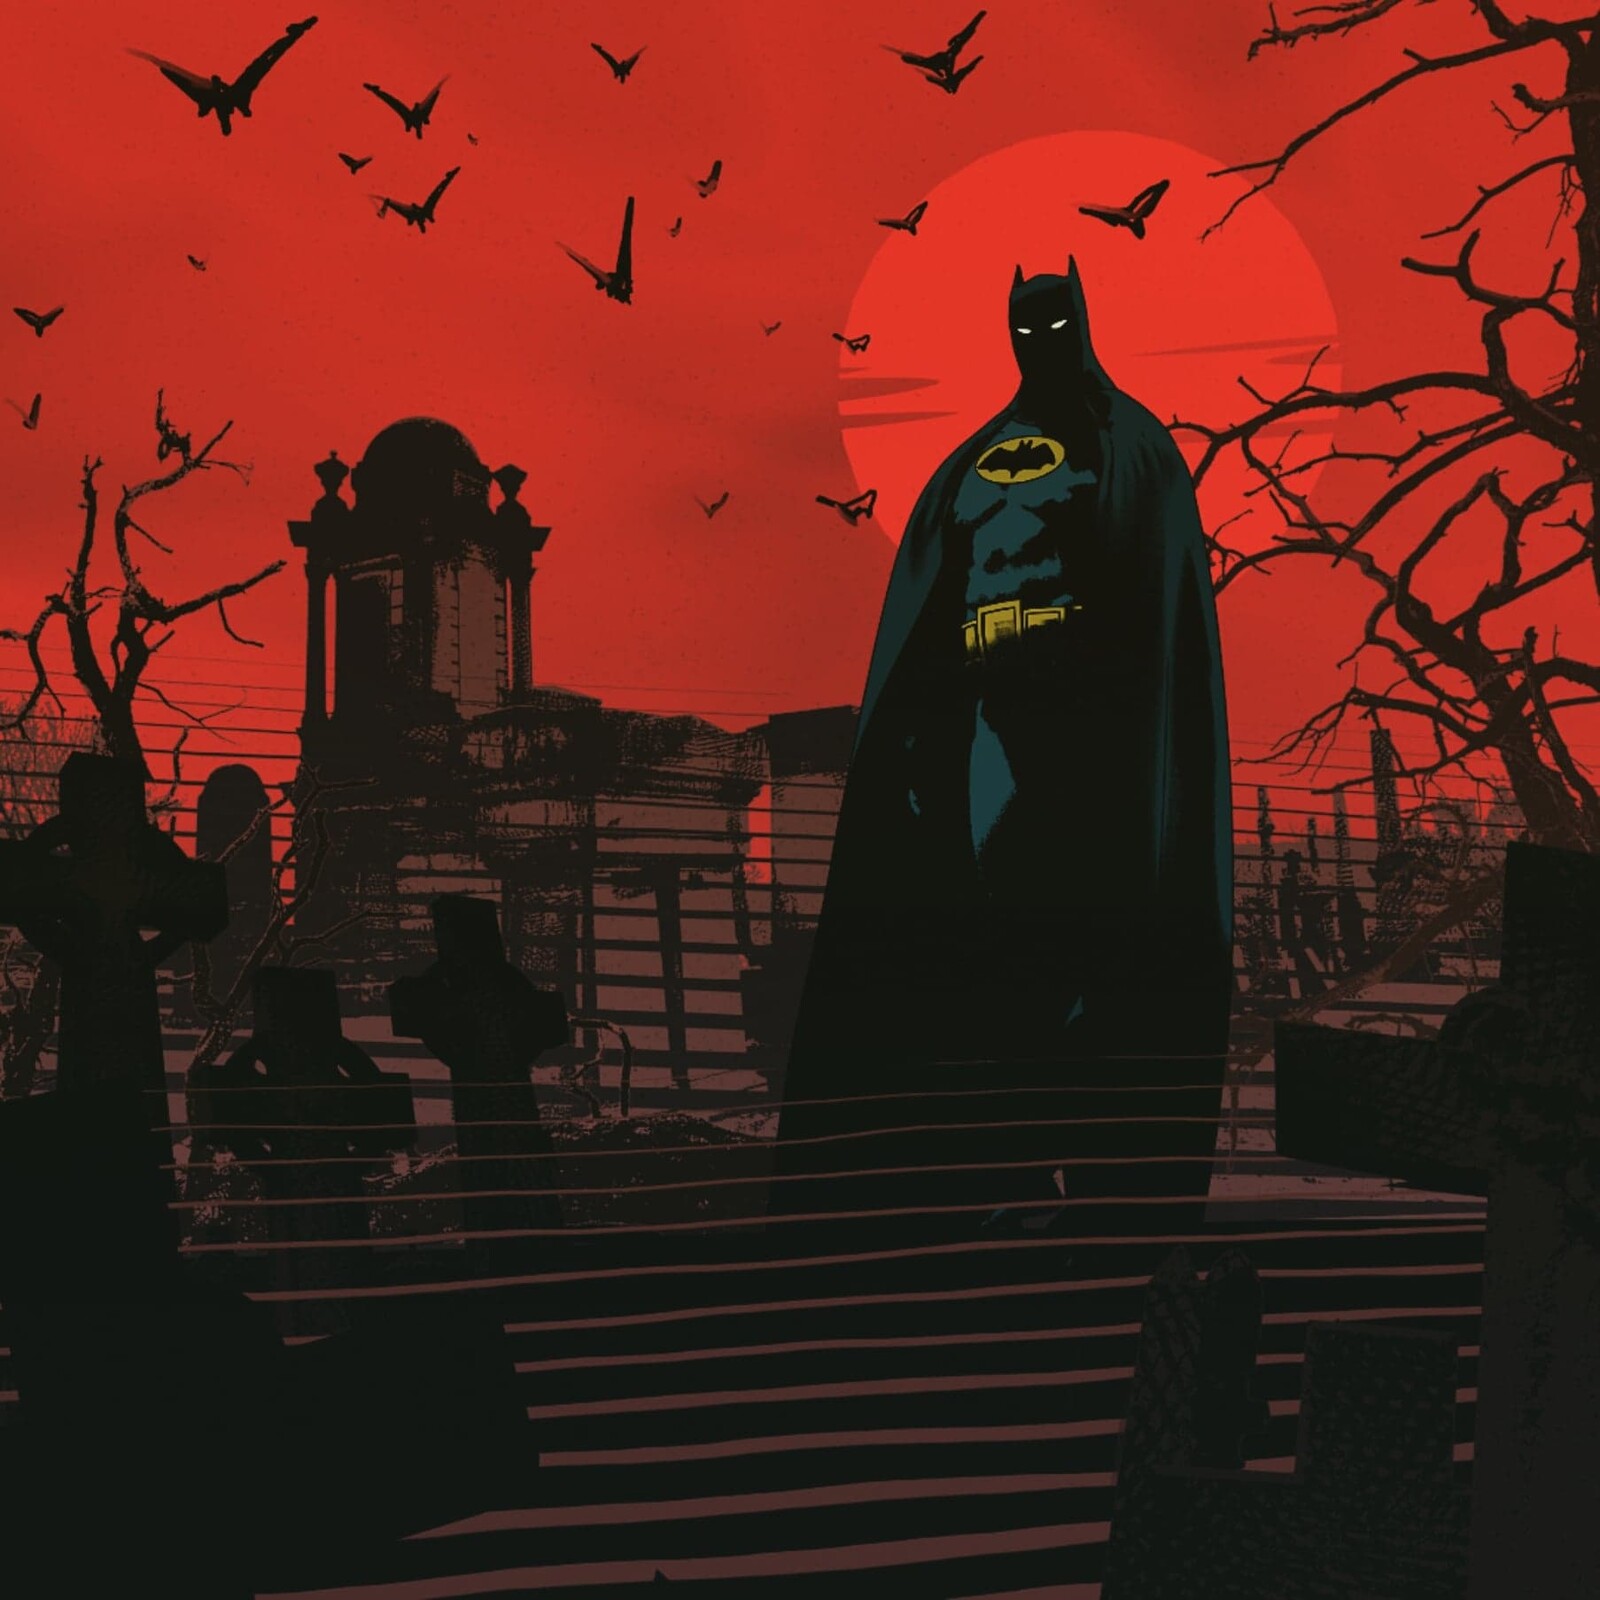 Shader to RGB node experiments with Mike Mignola's batman theme